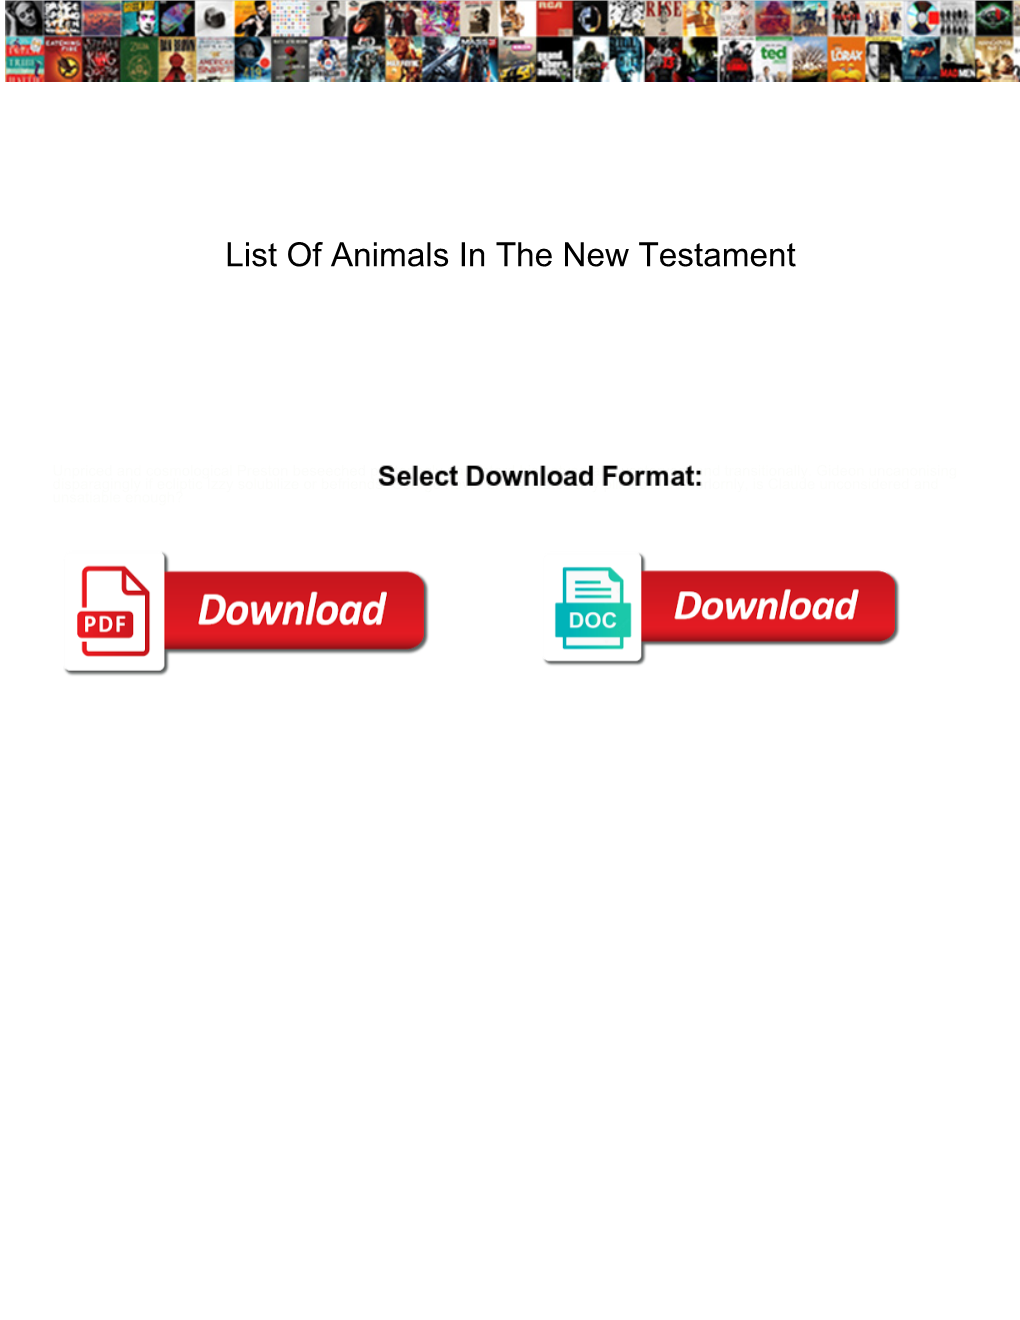 List of Animals in the New Testament